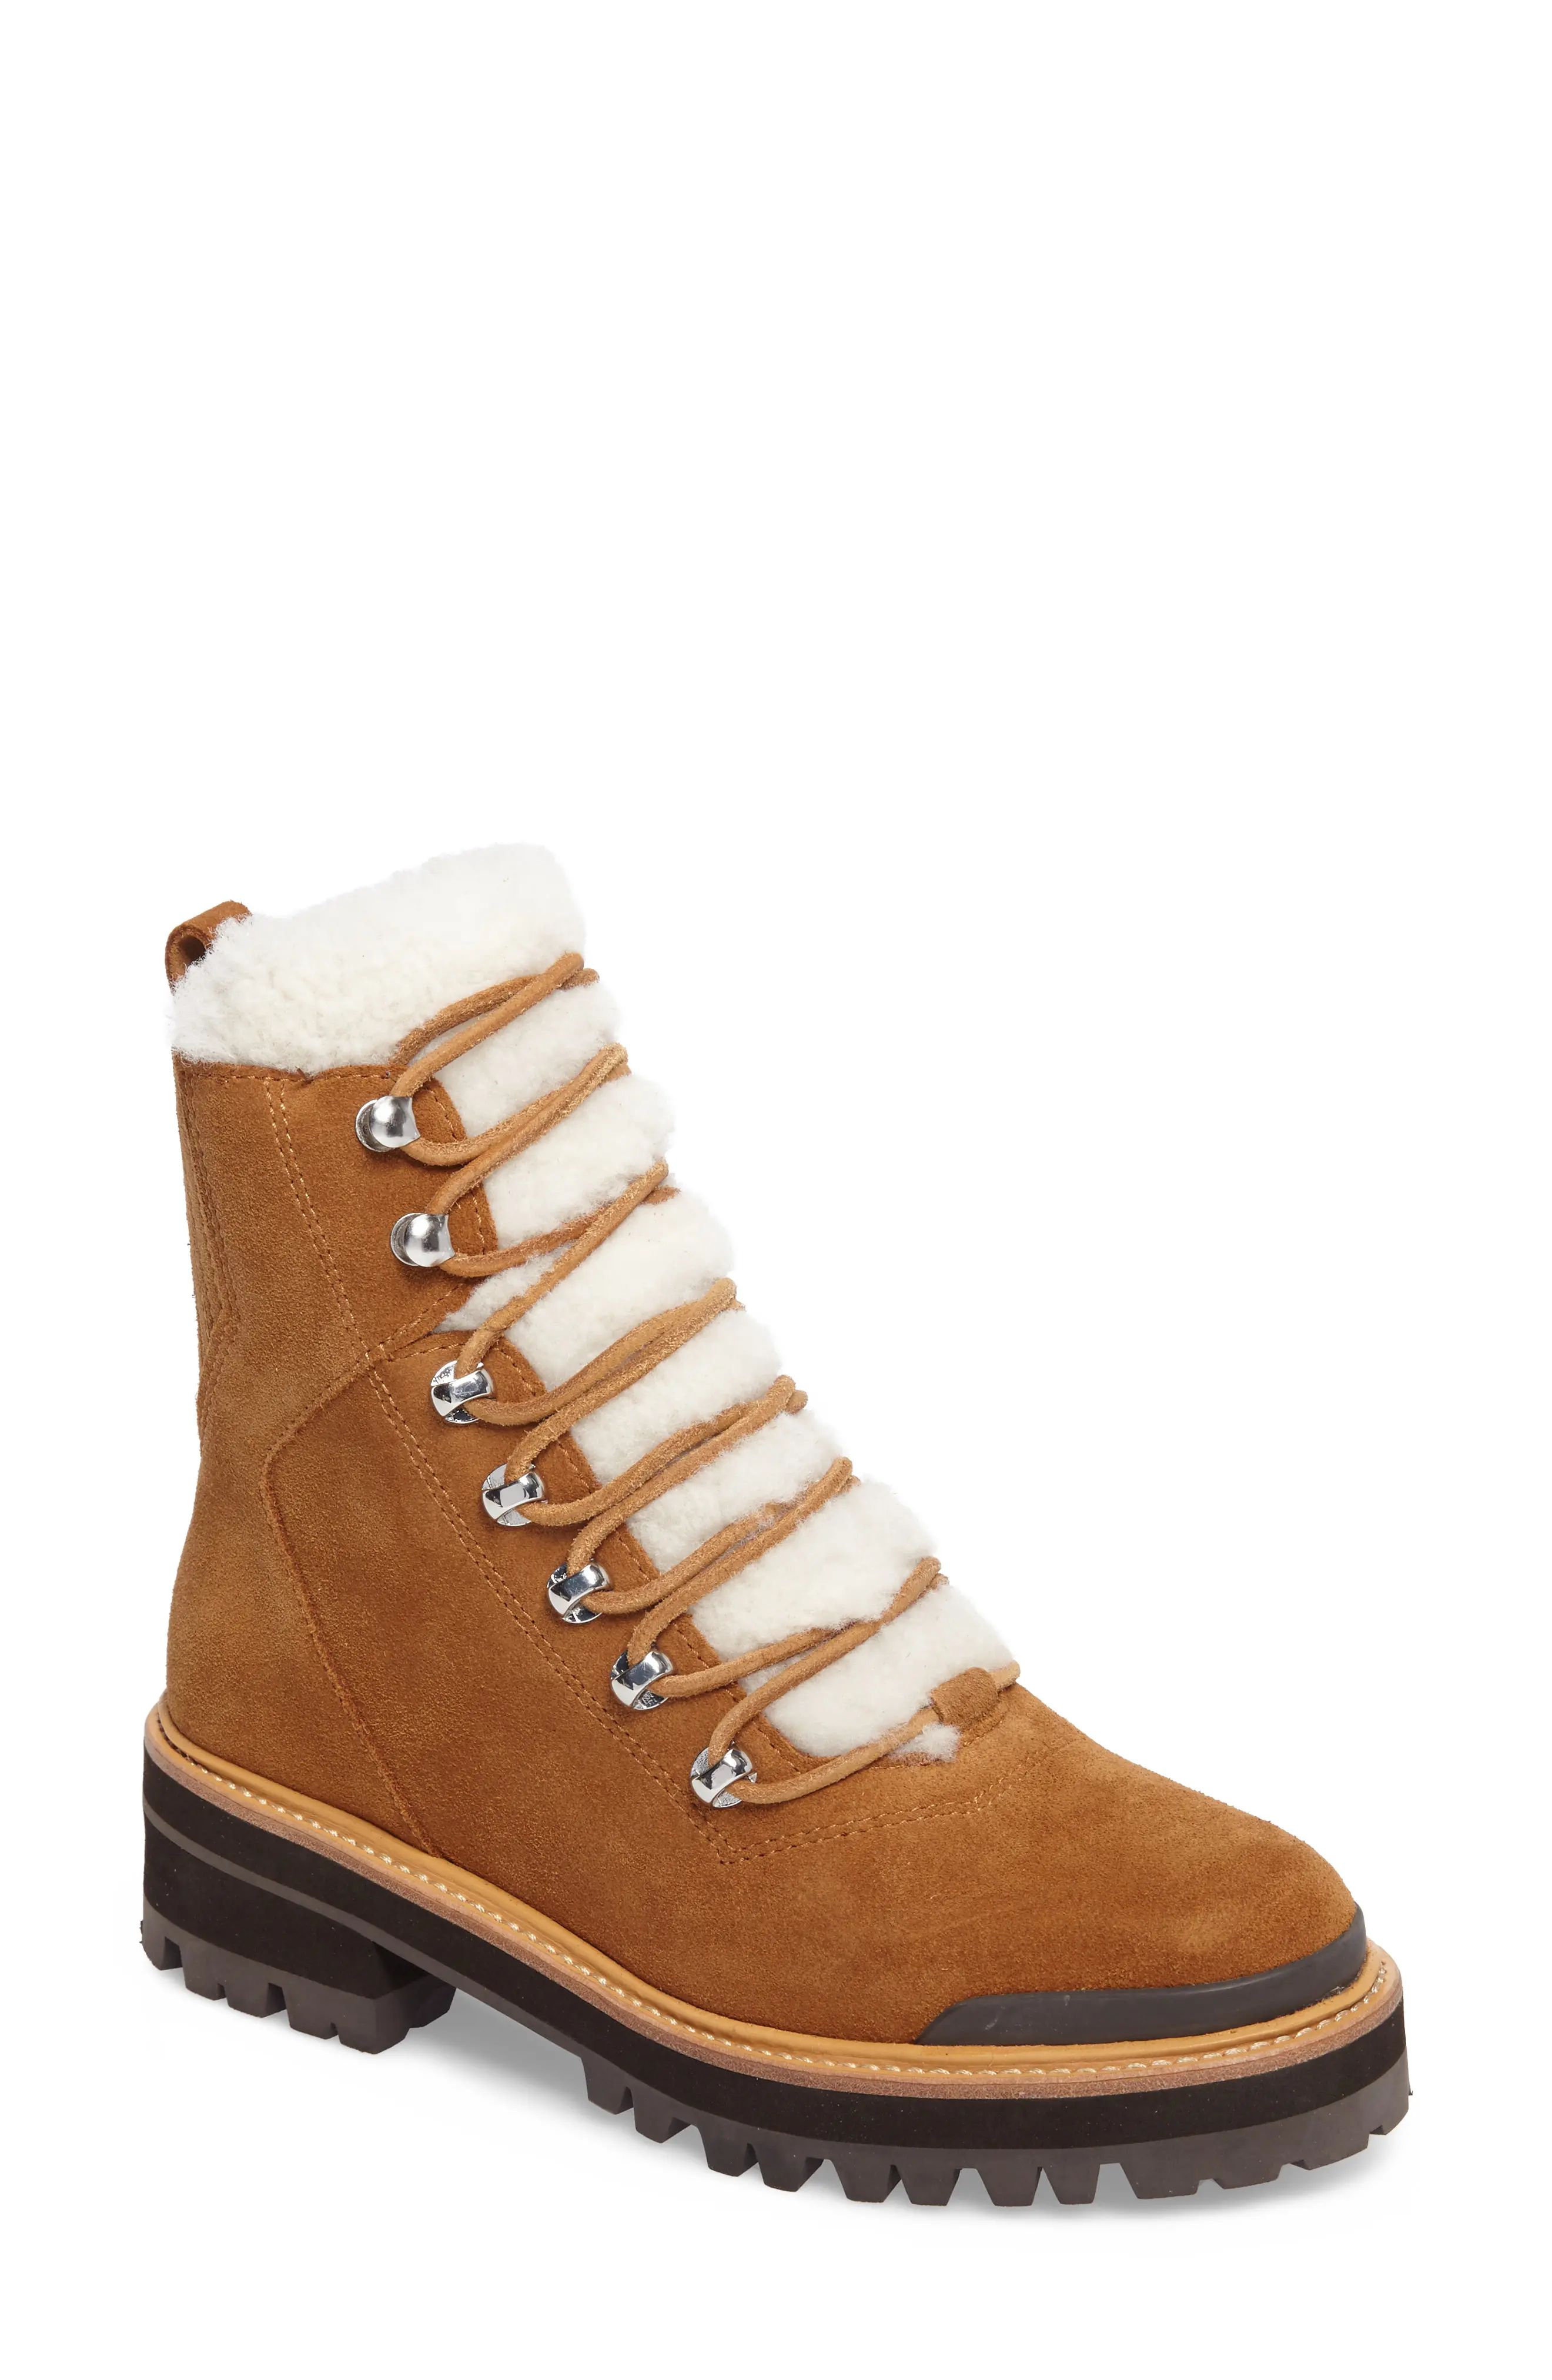 Marc Fisher LTD Izzie Genuine Shearling Lace-Up Boot in Cognac Suede at Nordstrom, Size 7 | Nordstrom